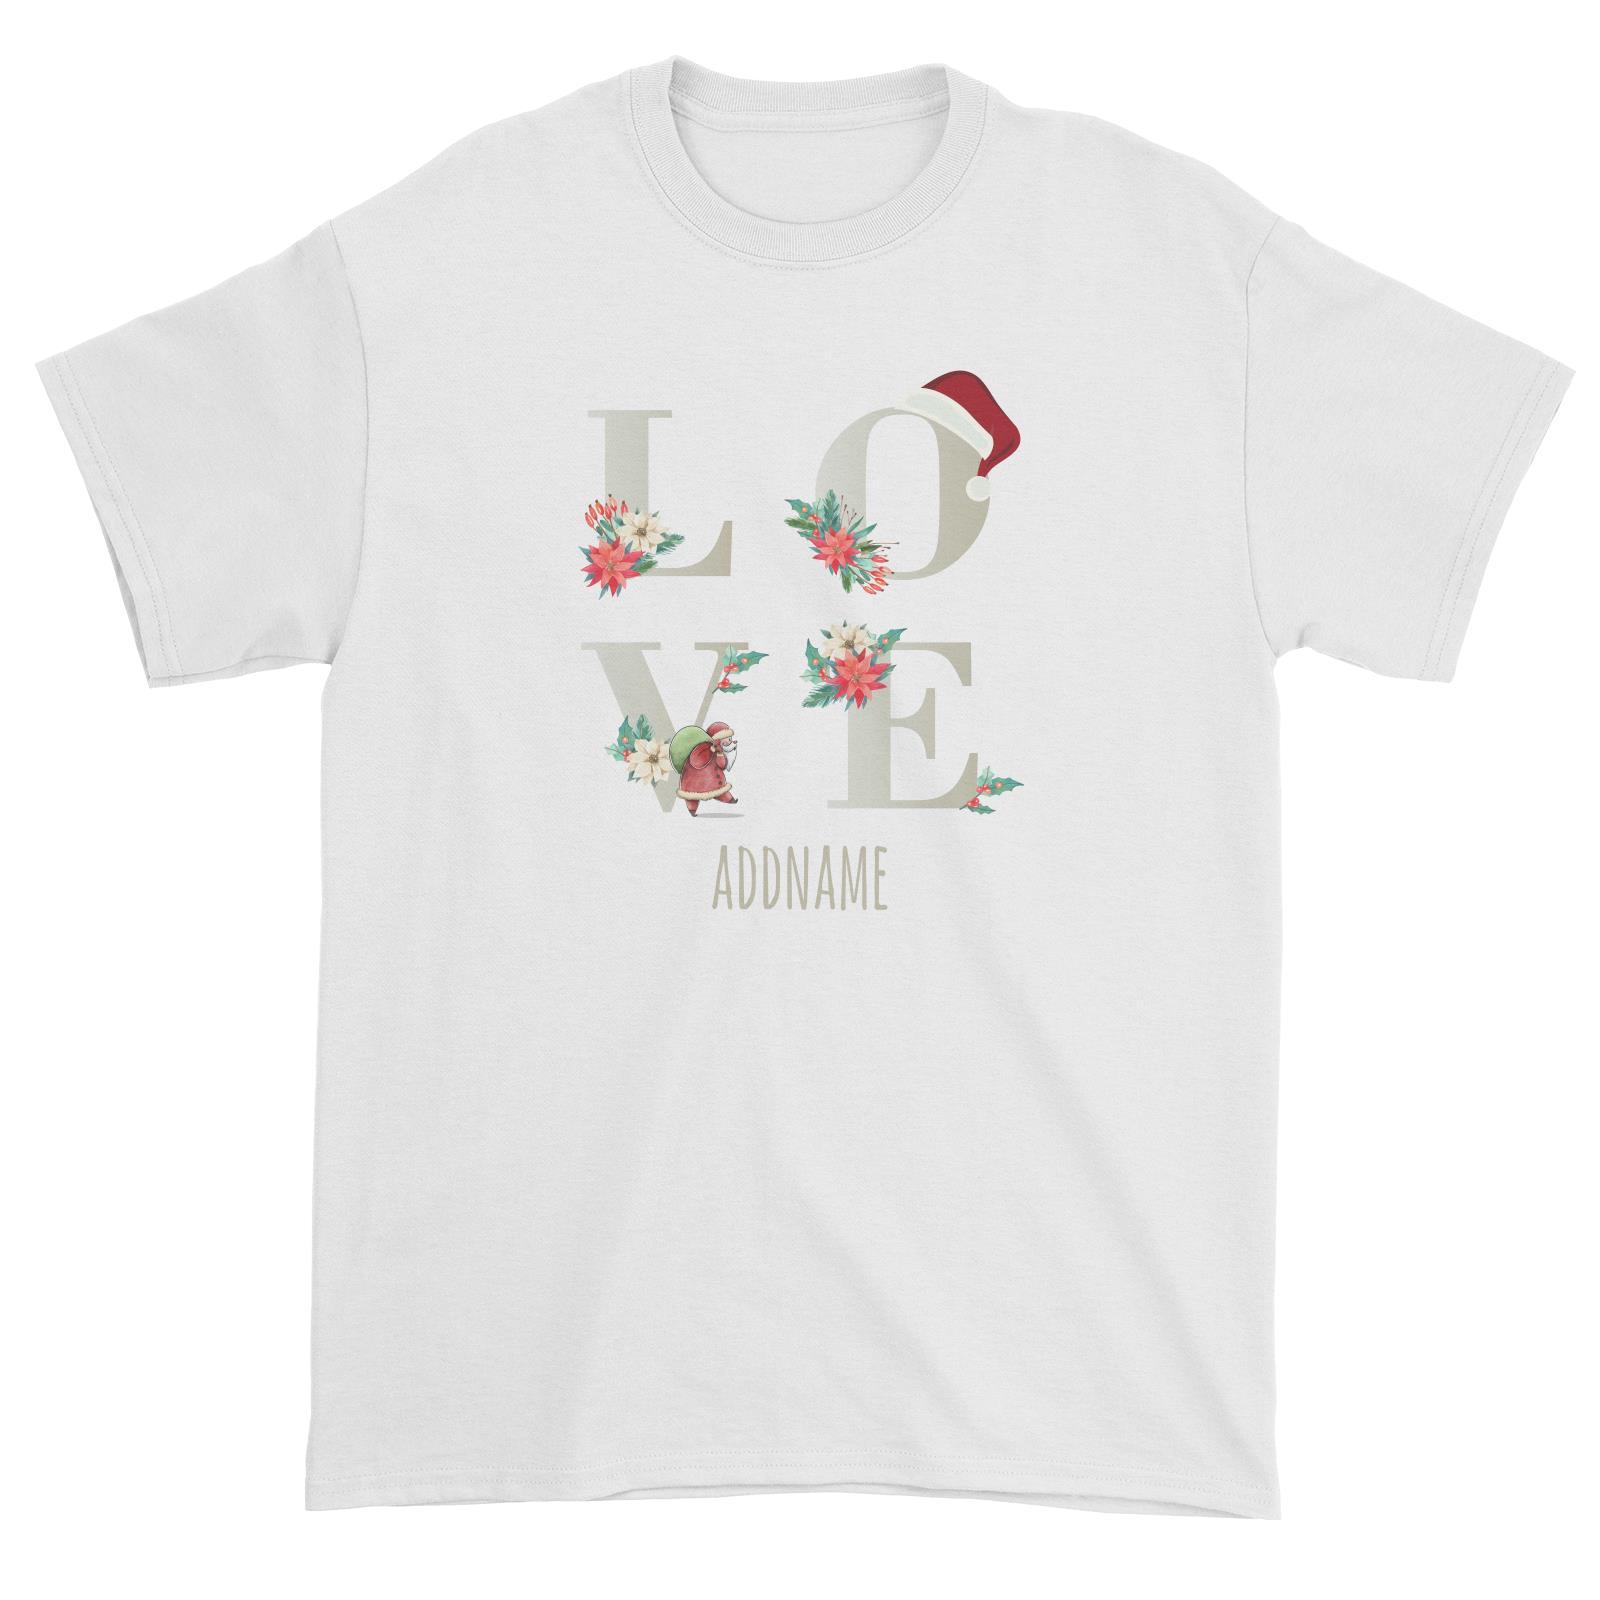 LOVE with Christmas Elements Addname Unisex T-Shirt  Matching Family Personalizable Designs